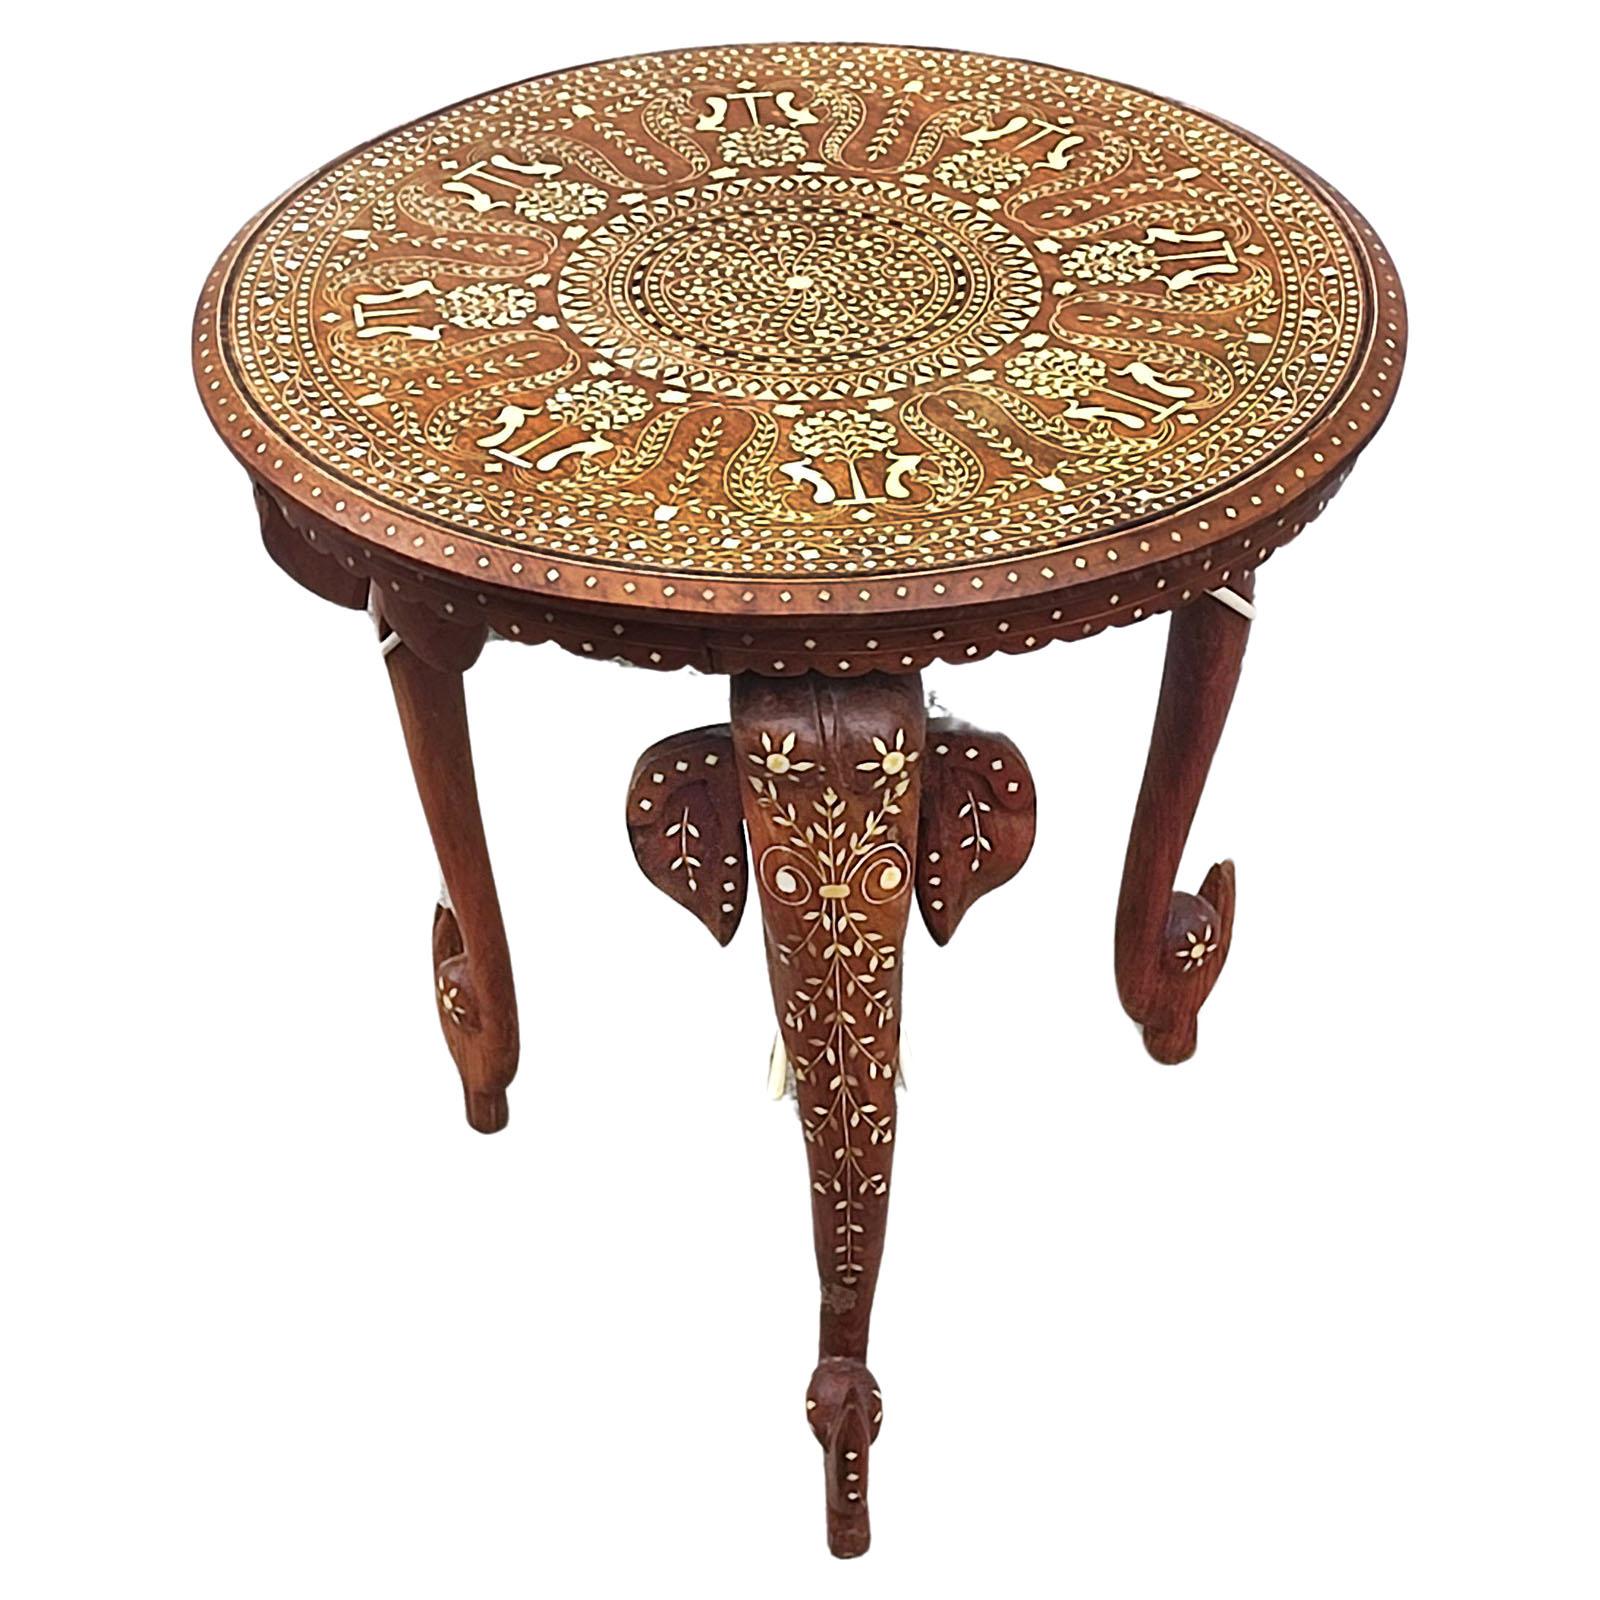 Anglo Indian Carved Wood and Inlaid Round Table with Elephants 